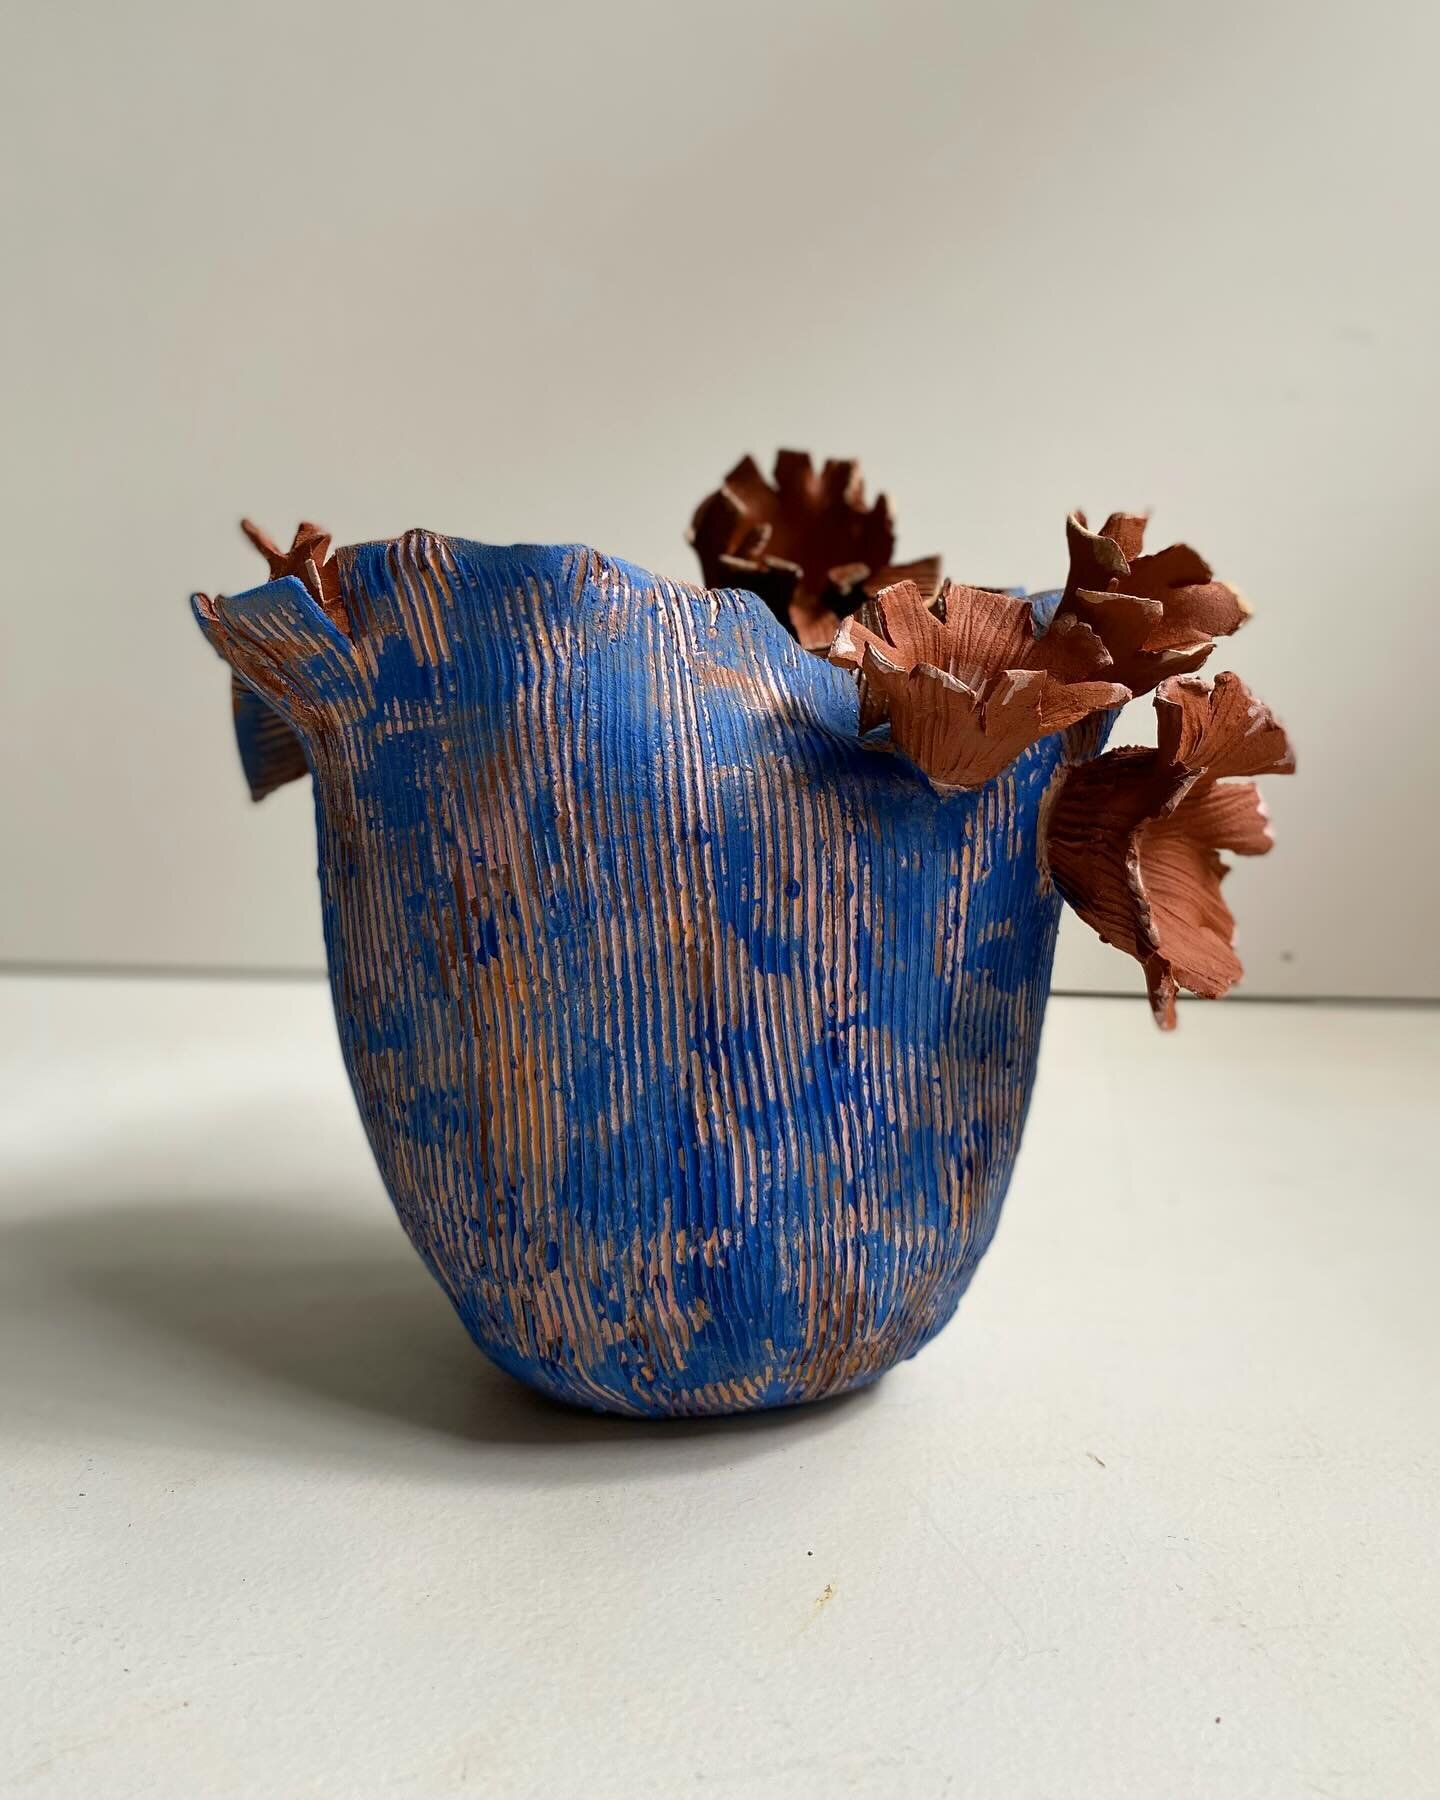 A test creation made last year to play with ideas. It was quite fun to make but was ultimately put aside for another direction.
After a month out of the studio I&rsquo;m ready to get stuck in and begin with some experimenting! #terracotta #wip #austr